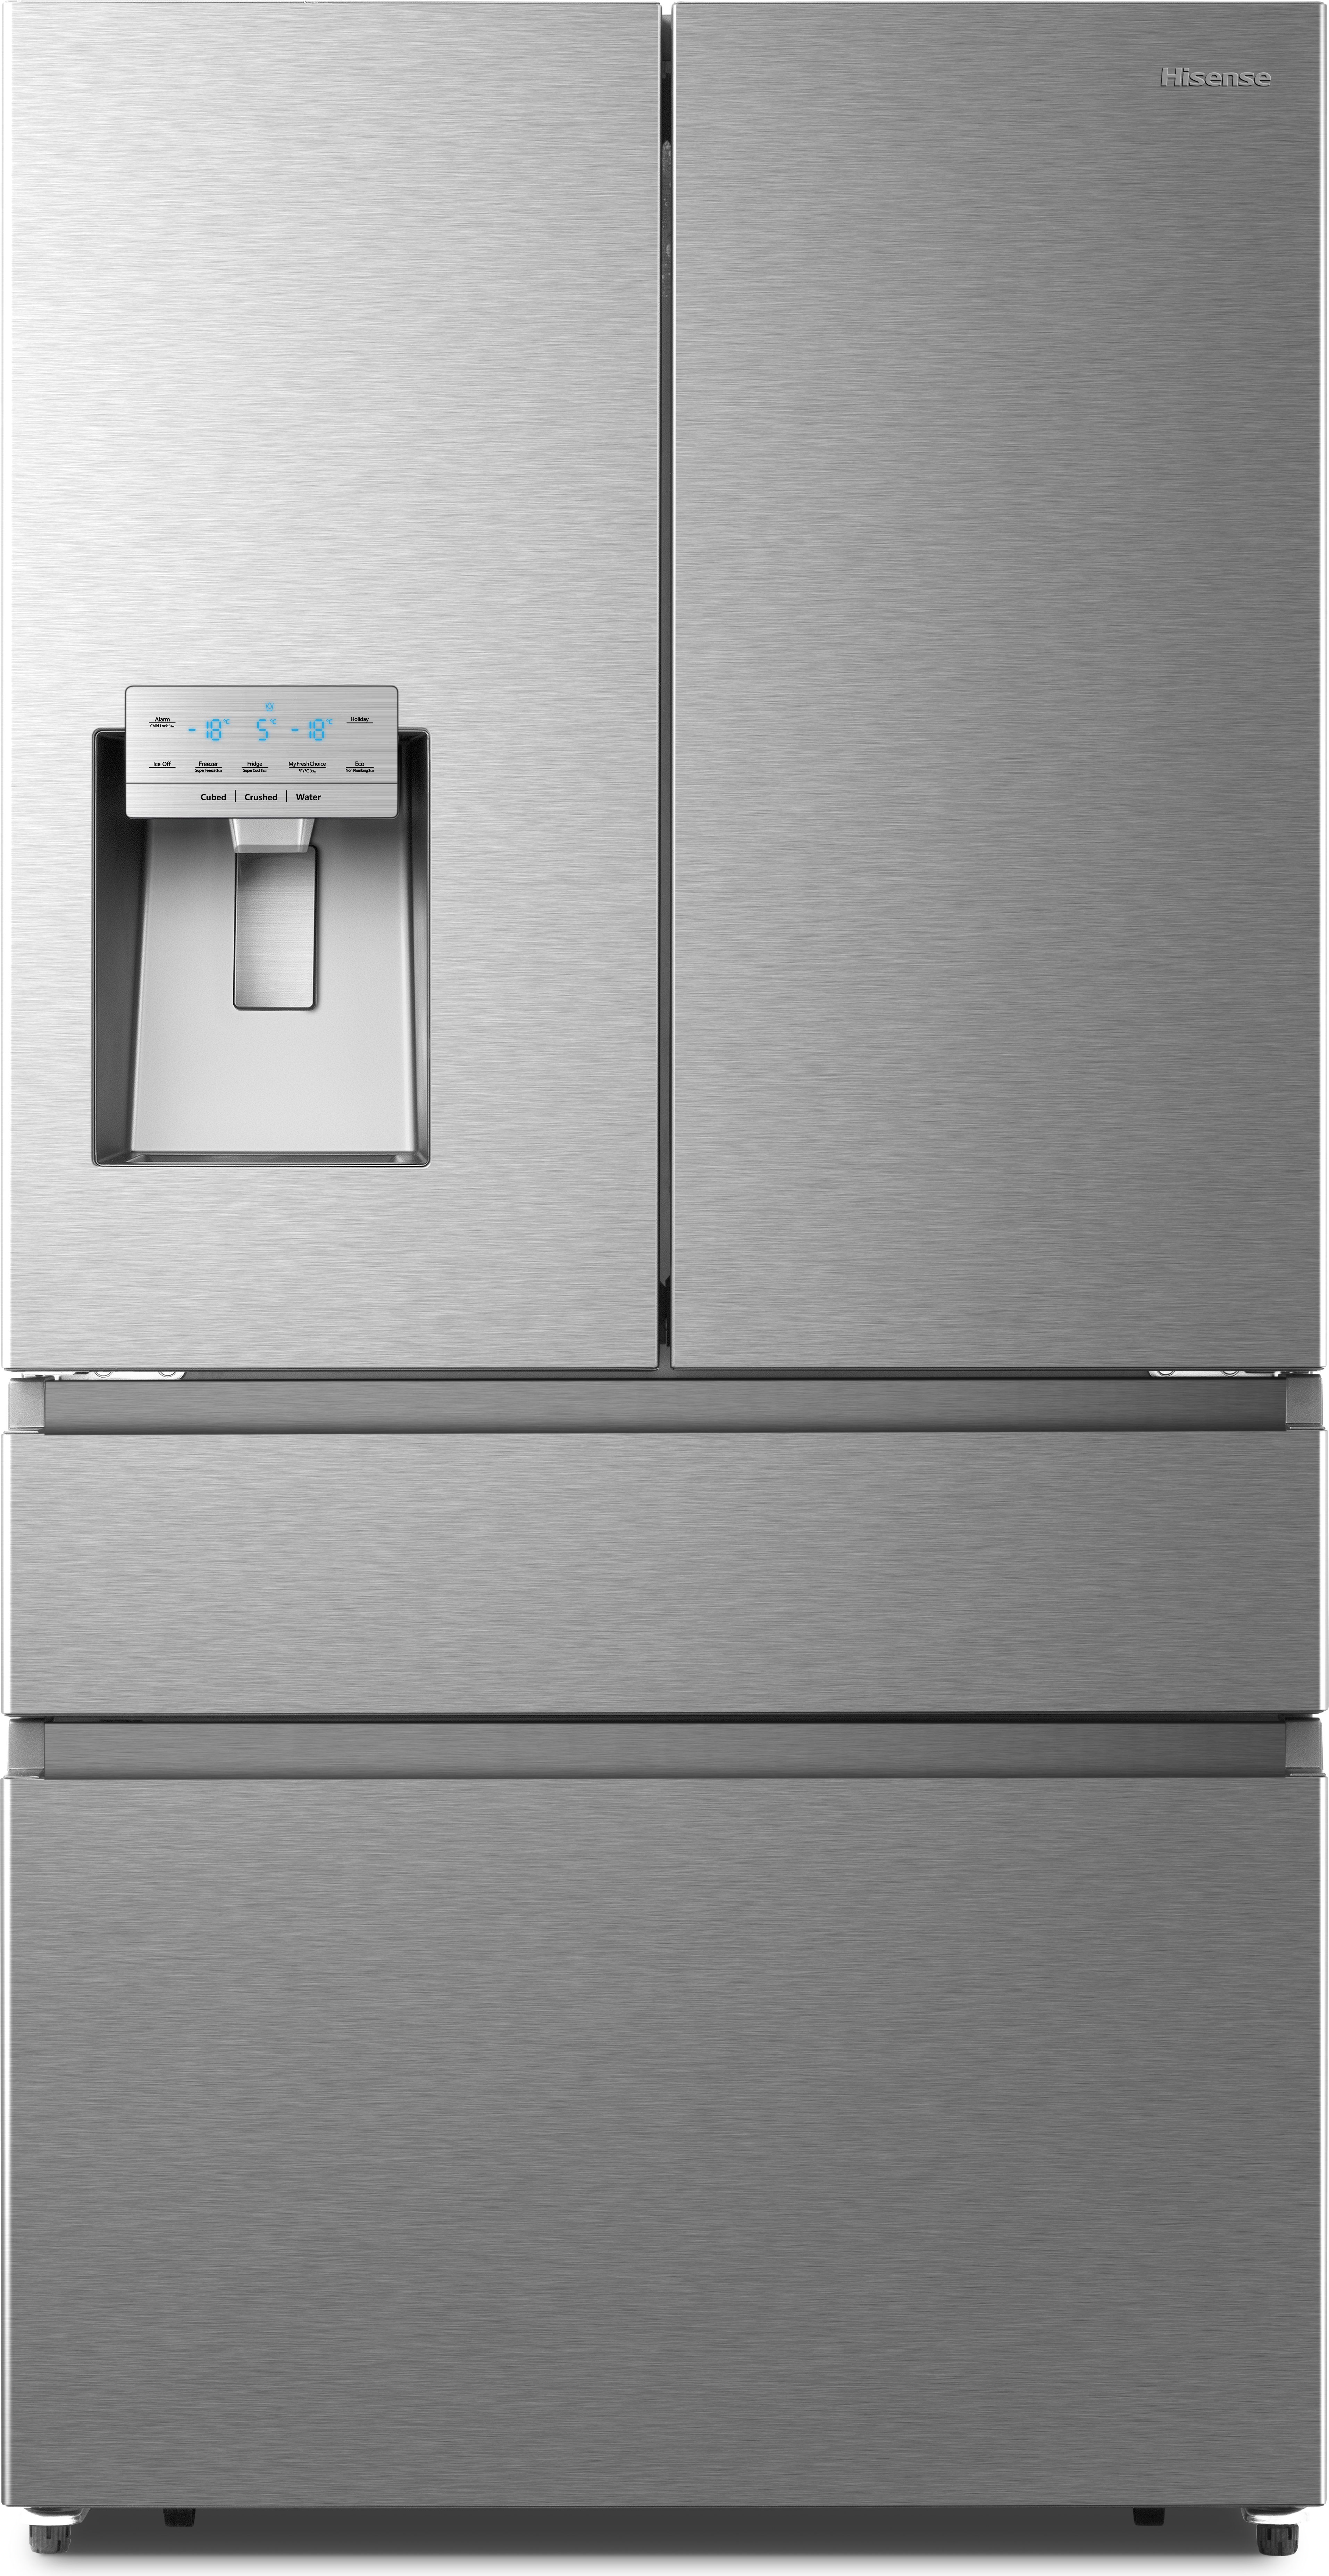 Hisense RF728N4SASE Total No Frost American Fridge Freezer - Stainless Steel - E Rated, Stainless Steel